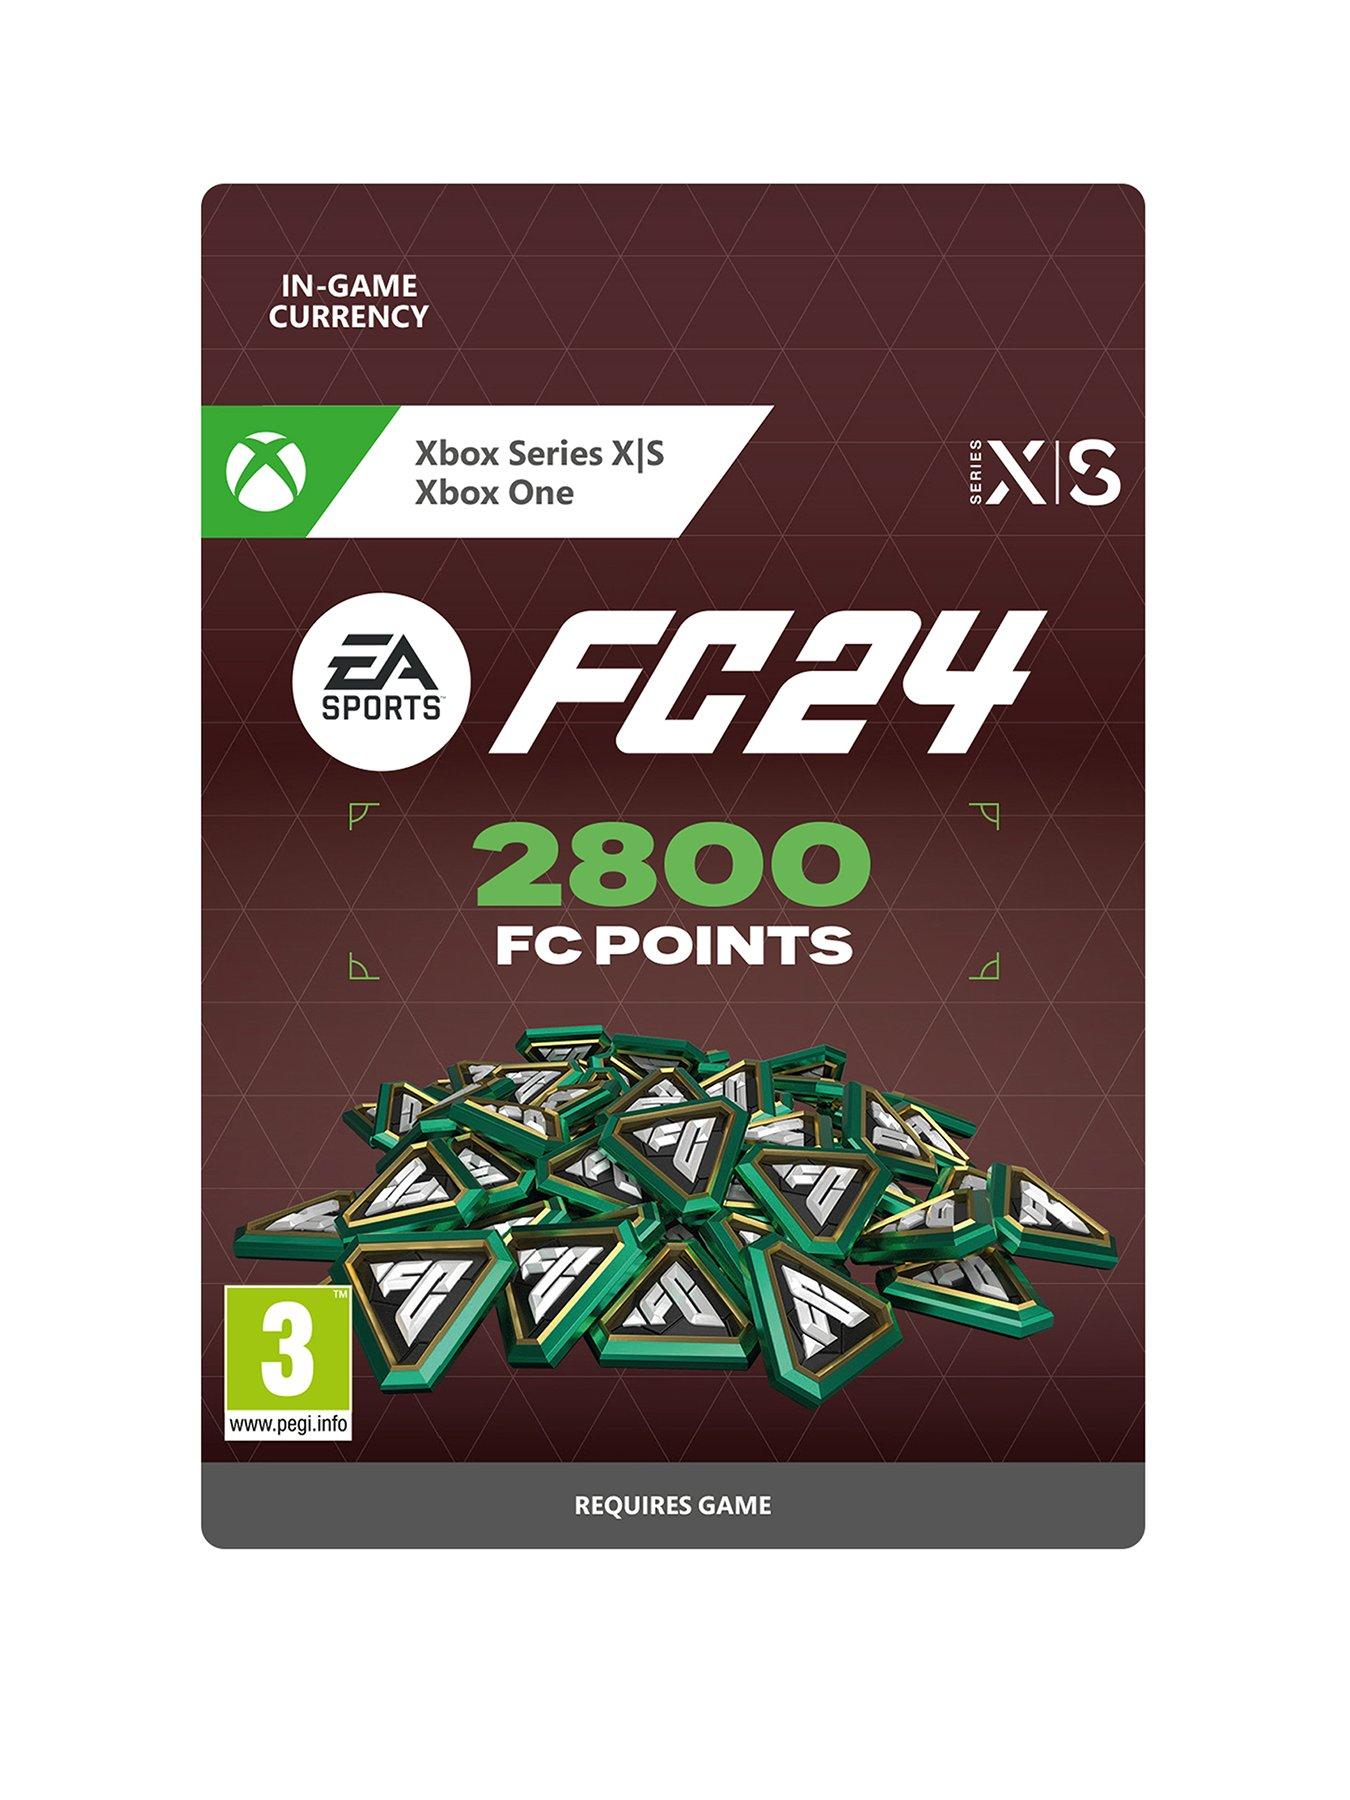 Xbox One | Gaming & dvd | www.very.co.uk